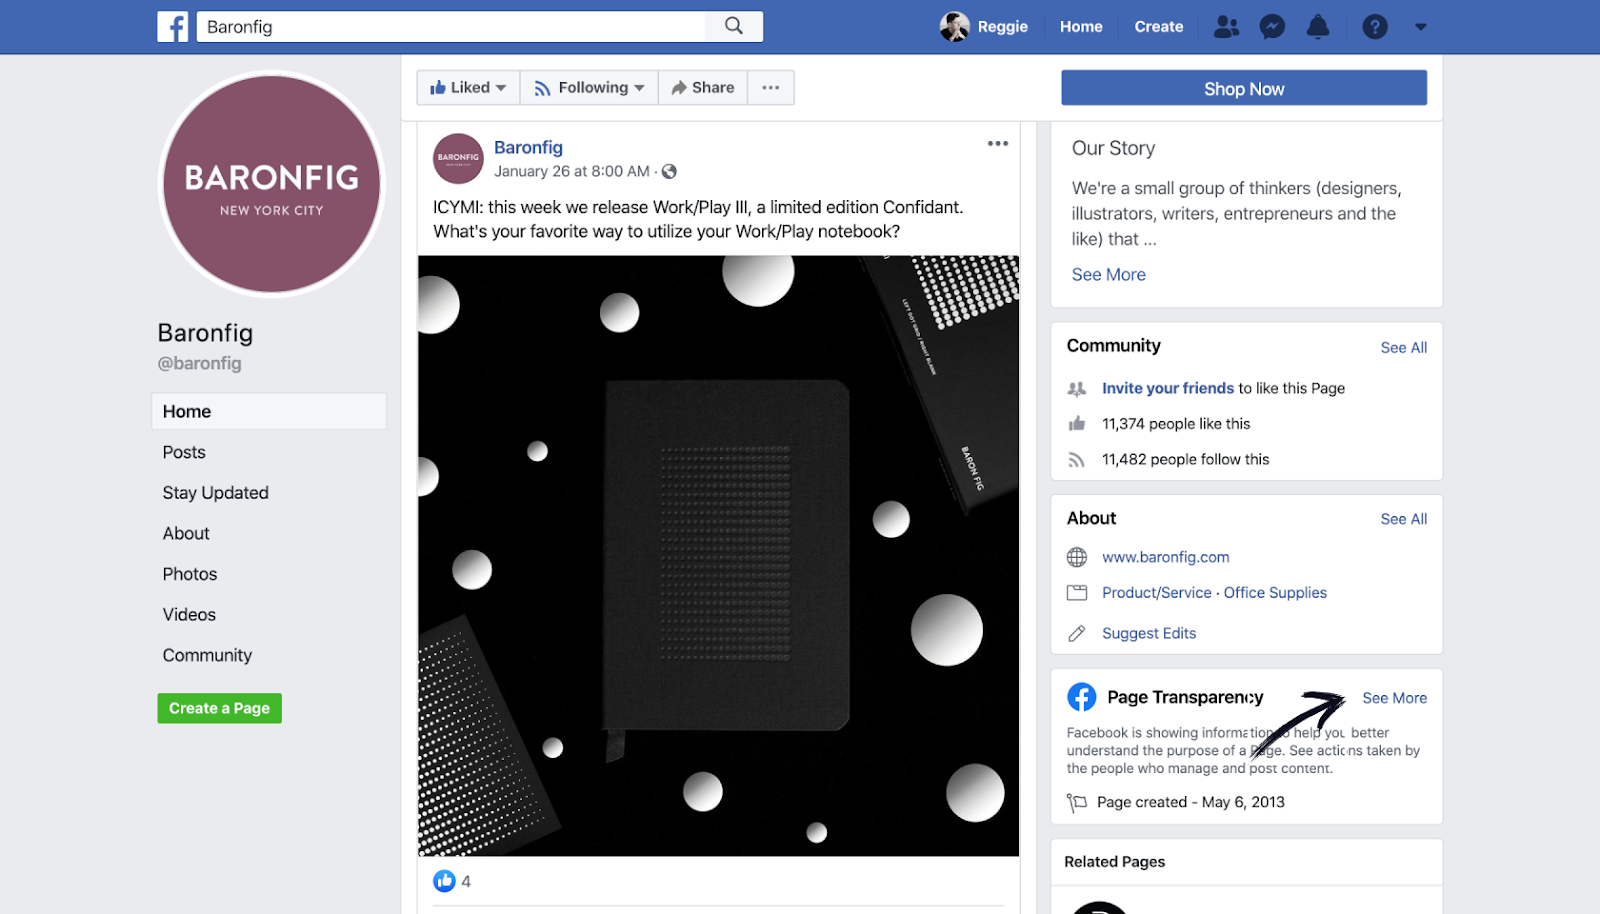 Facebook competitor Page transparency